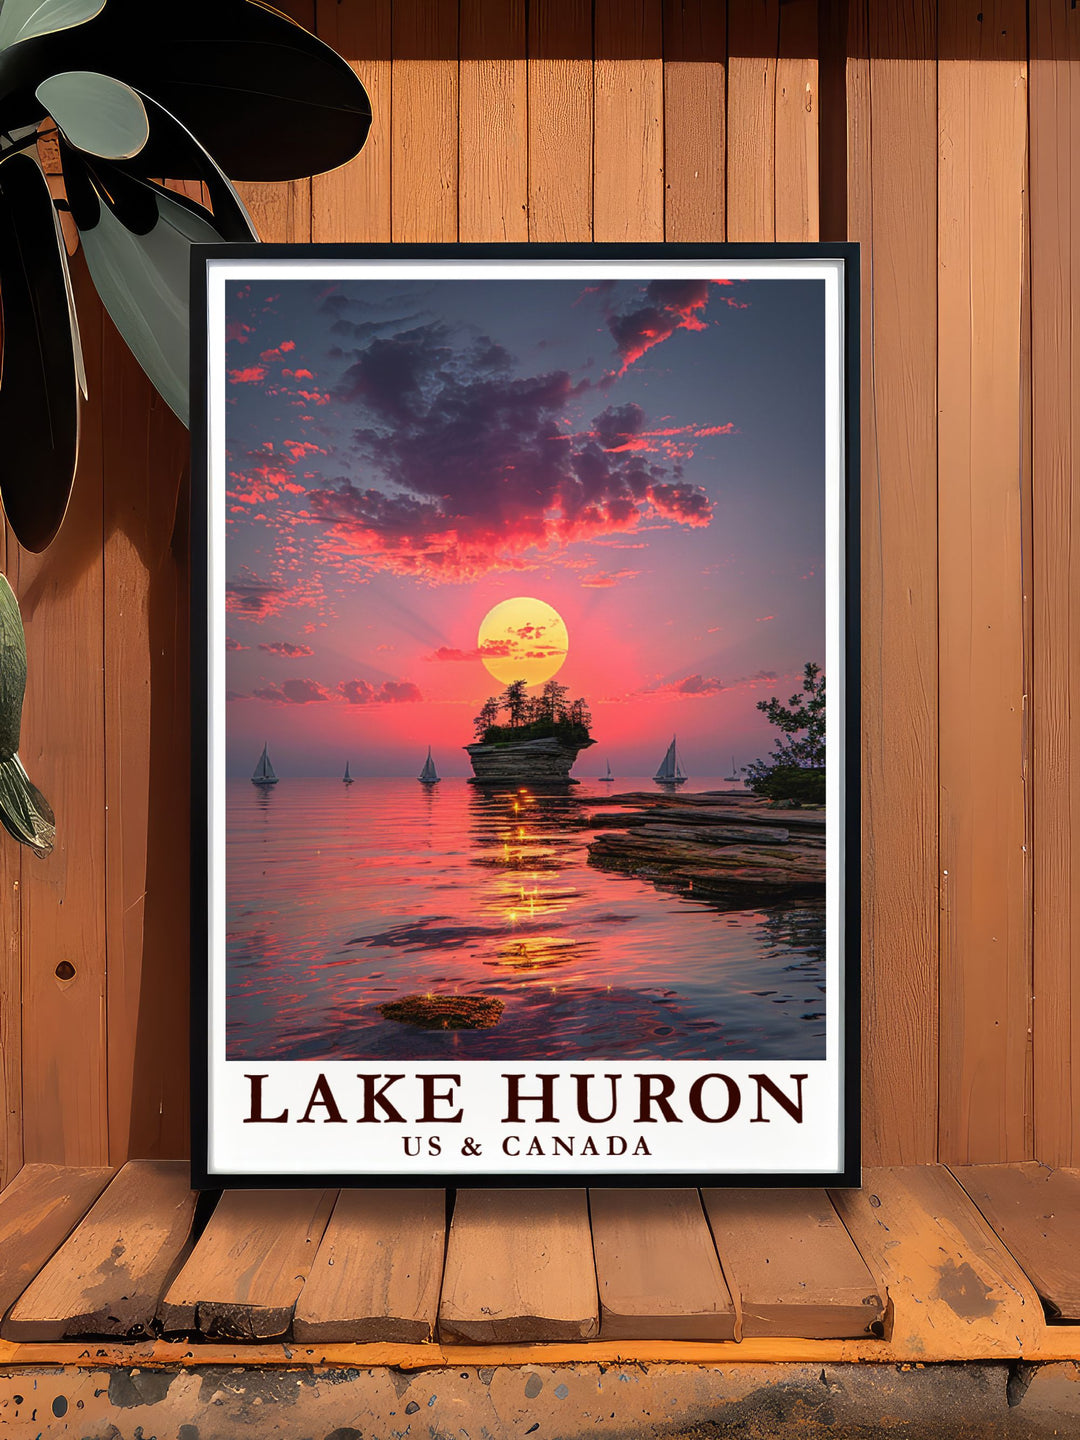 The Lake Huron modern art print is a stunning addition to any home. Featuring the tranquil waters and picturesque scenery of Lake Huron this print is perfect for enhancing your decor and adding a touch of elegance to your living space